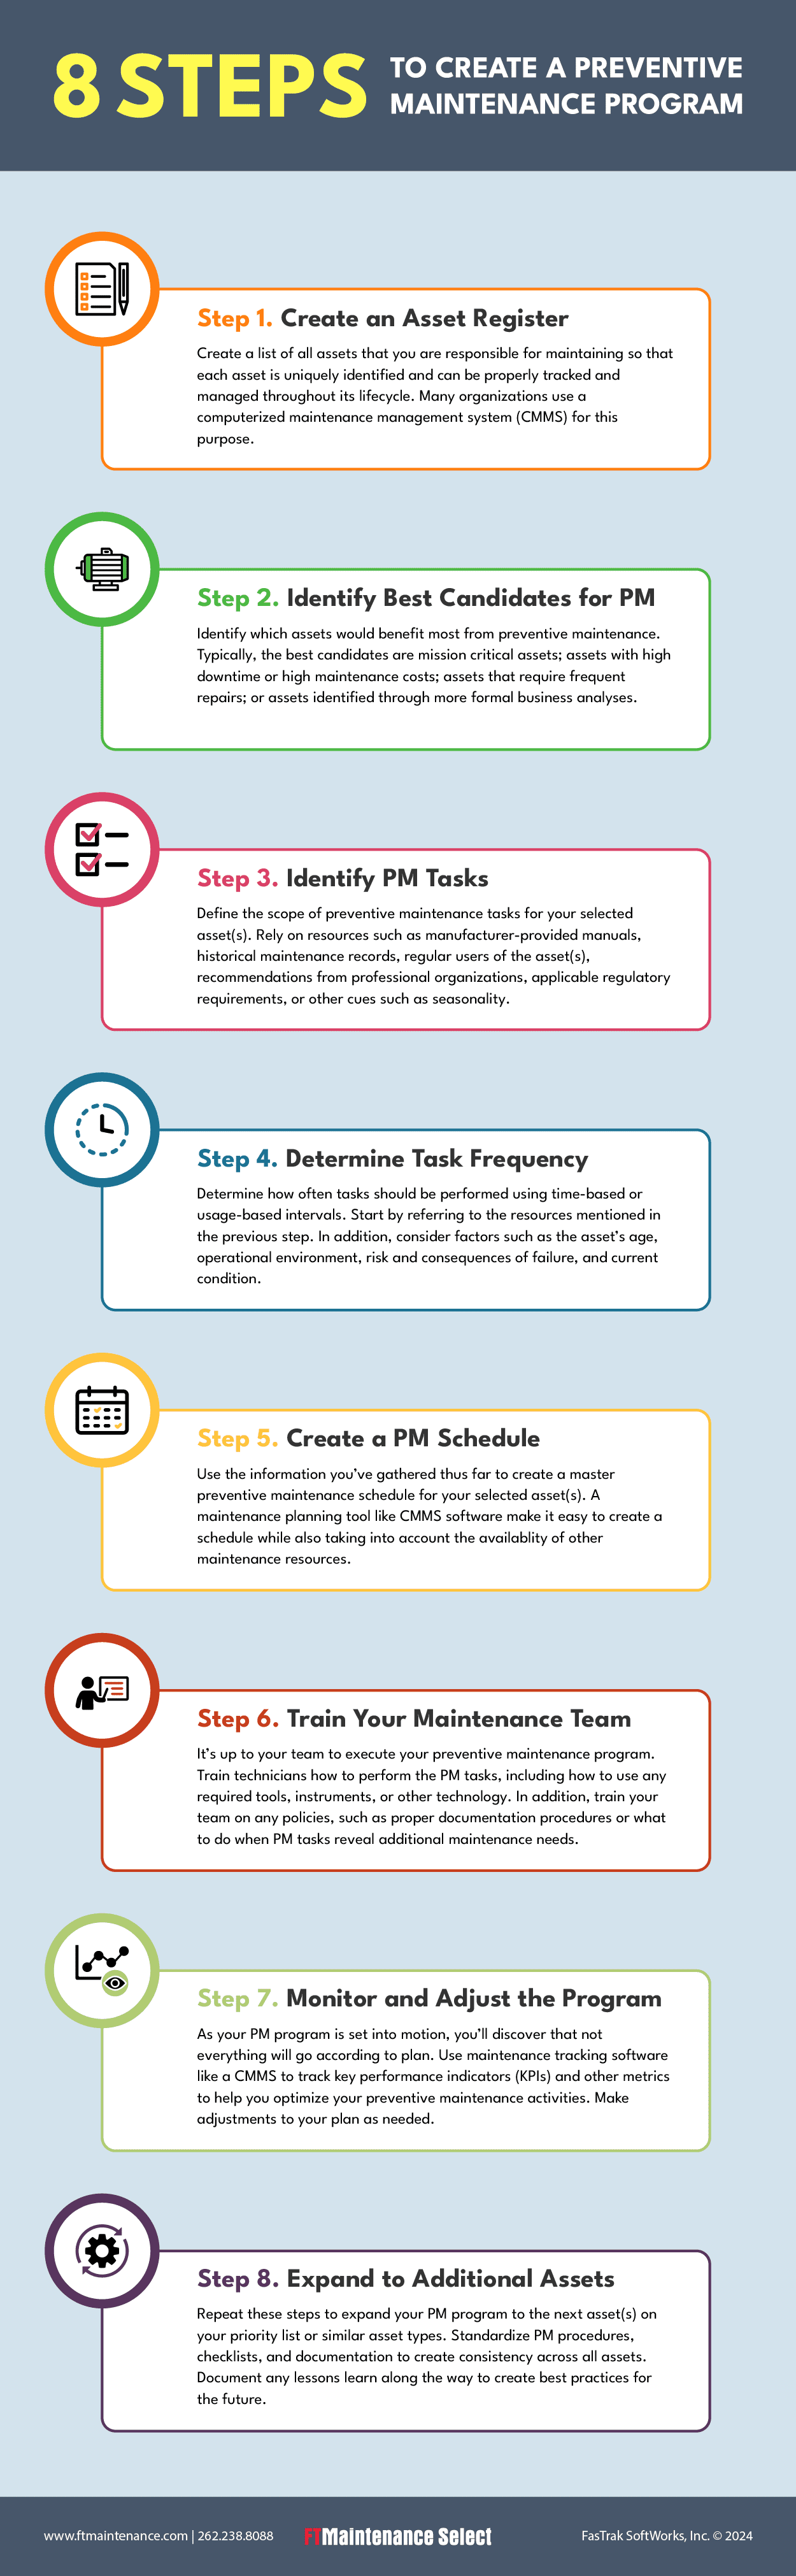 Infographic describing how to create a preventive maintenance program in 8 steps